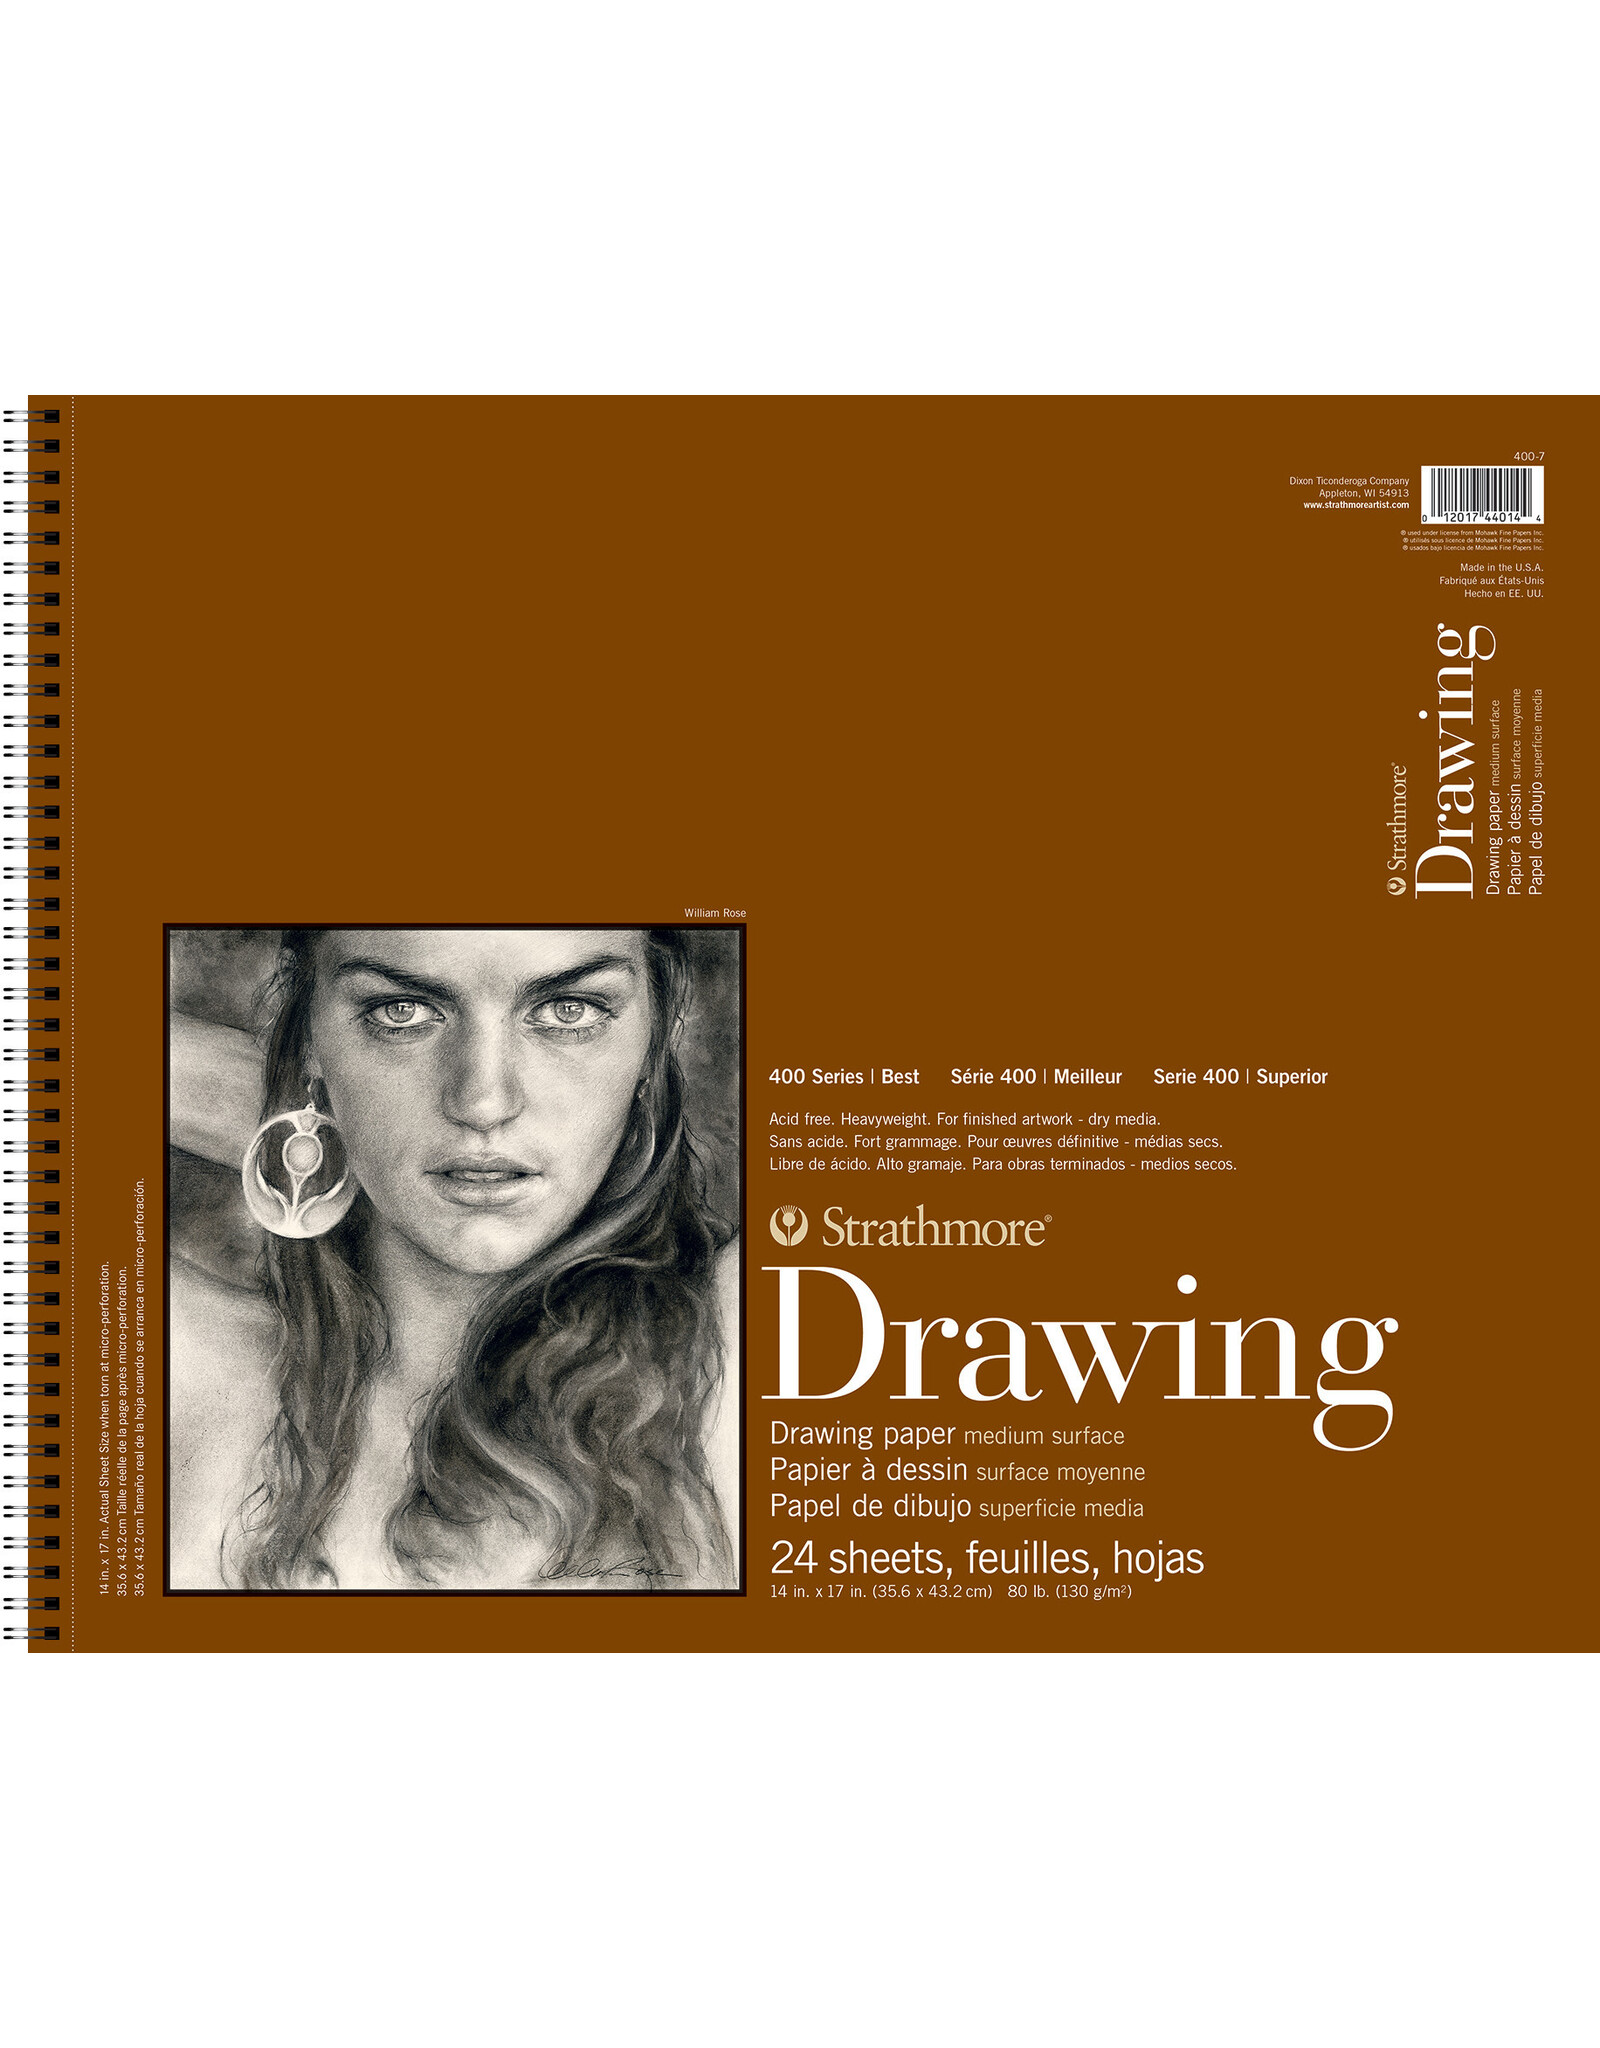 Strathmore Strathmore 400 Series Drawing Pads, 24 Sheets, 14” x 17”